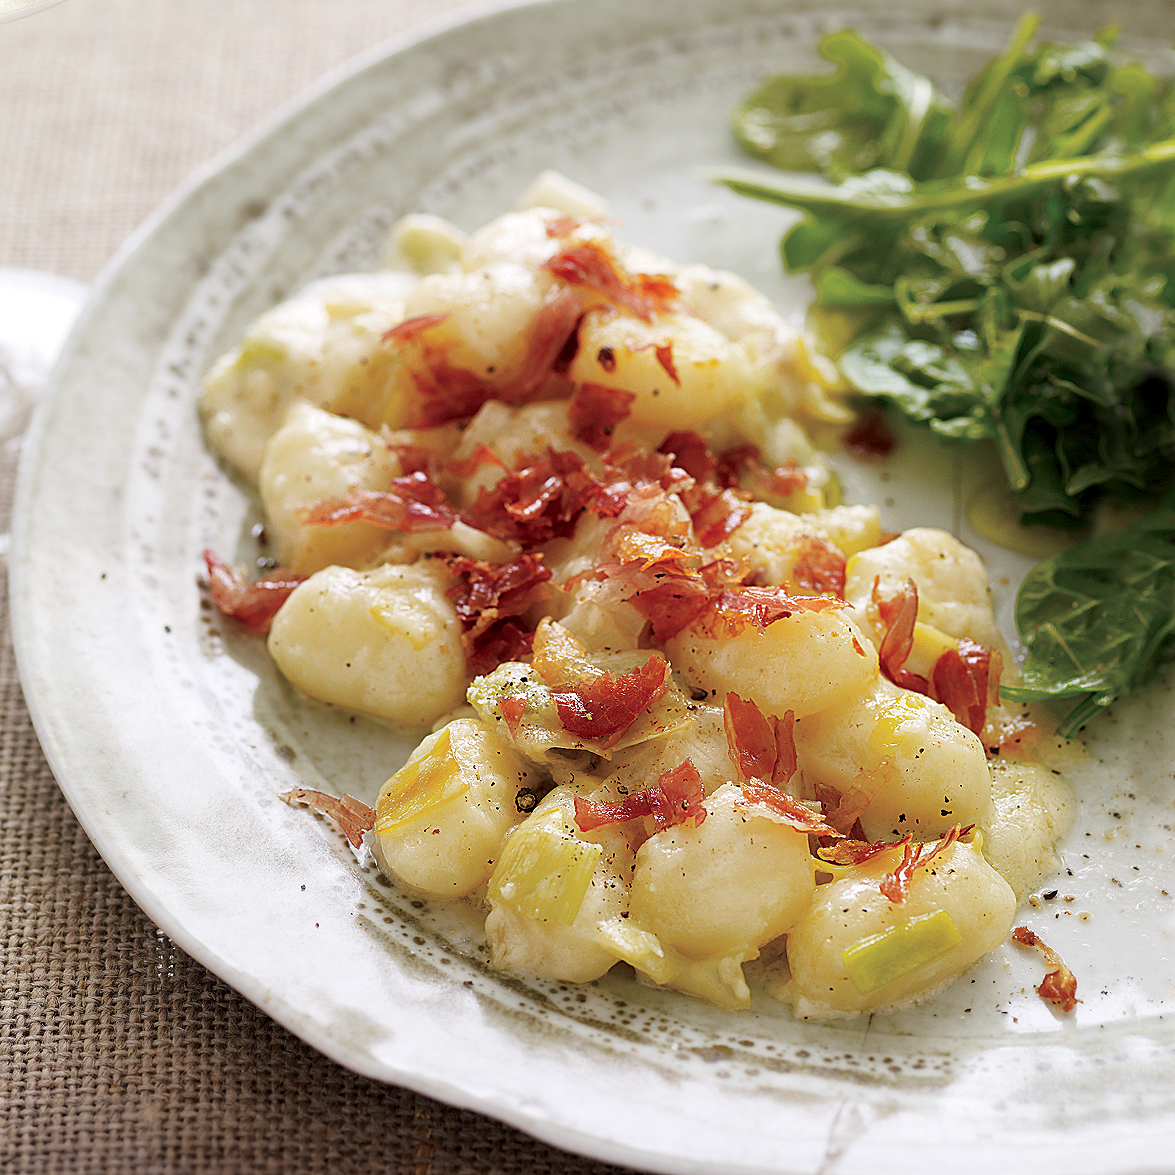 leek-and-gnocchi bake with three cheeses and crispy prosciutto